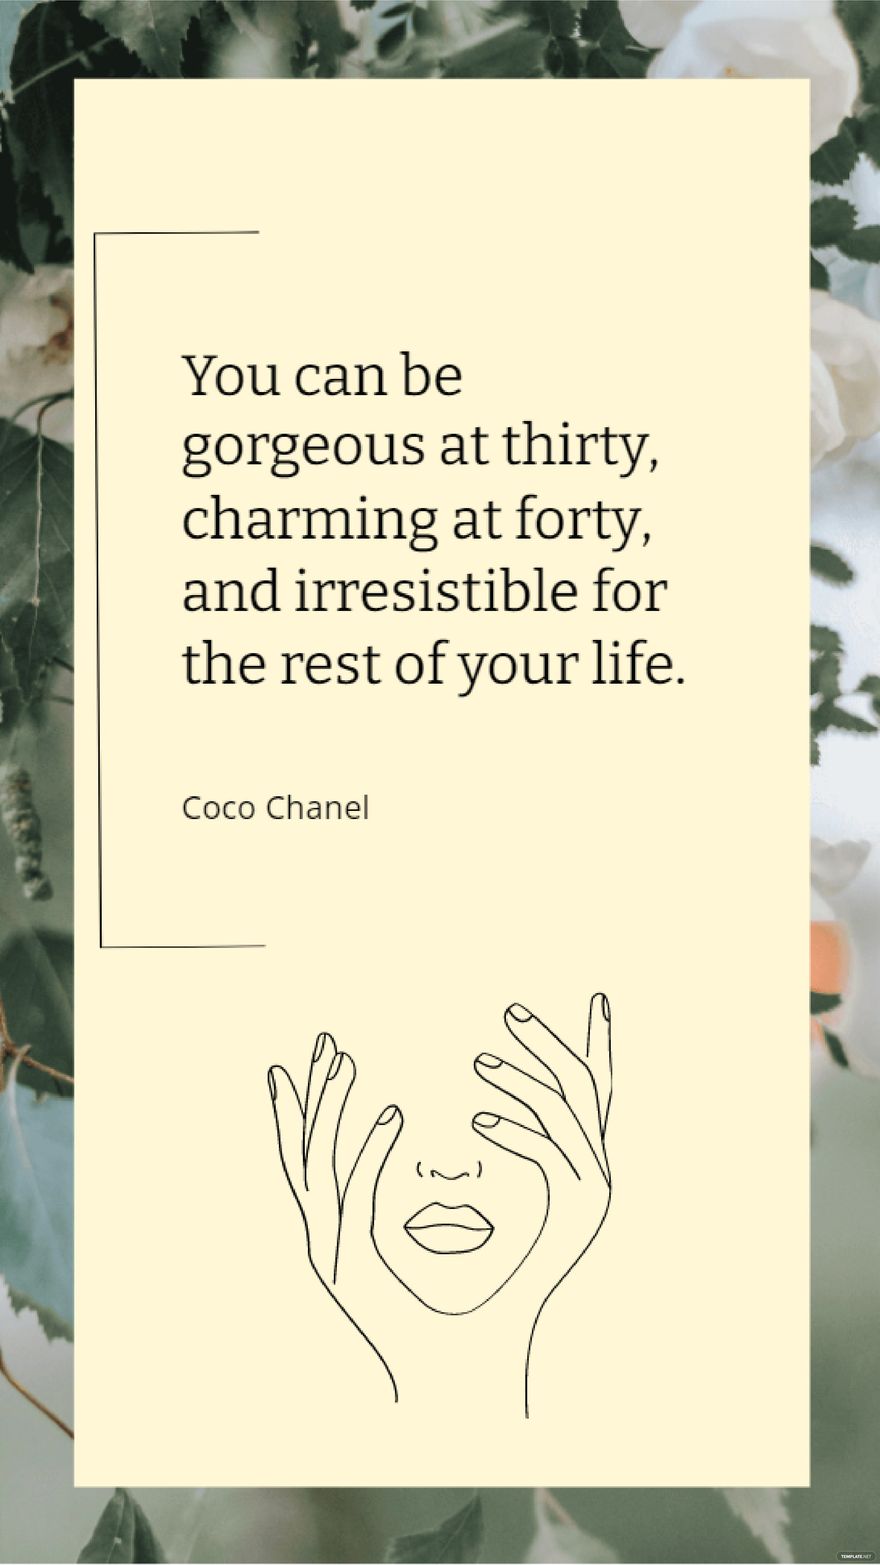 Coco Chanel - You can be gorgeous at thirty, charming at forty, and irresistible for the rest of your life.